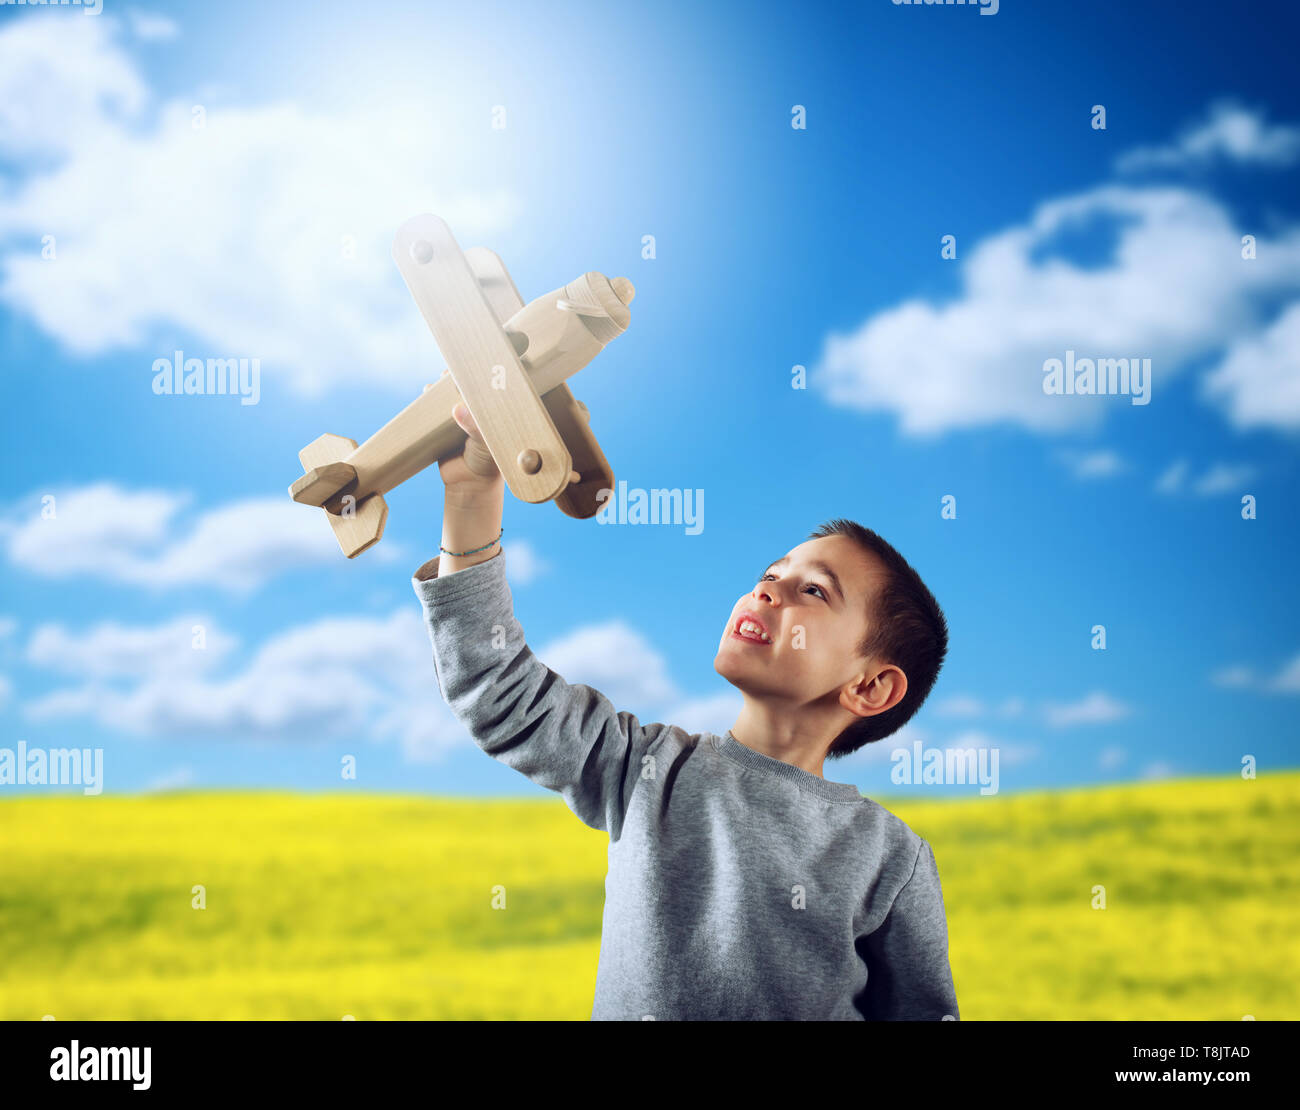 Kid plays with a wooden toy airplane Stock Photo